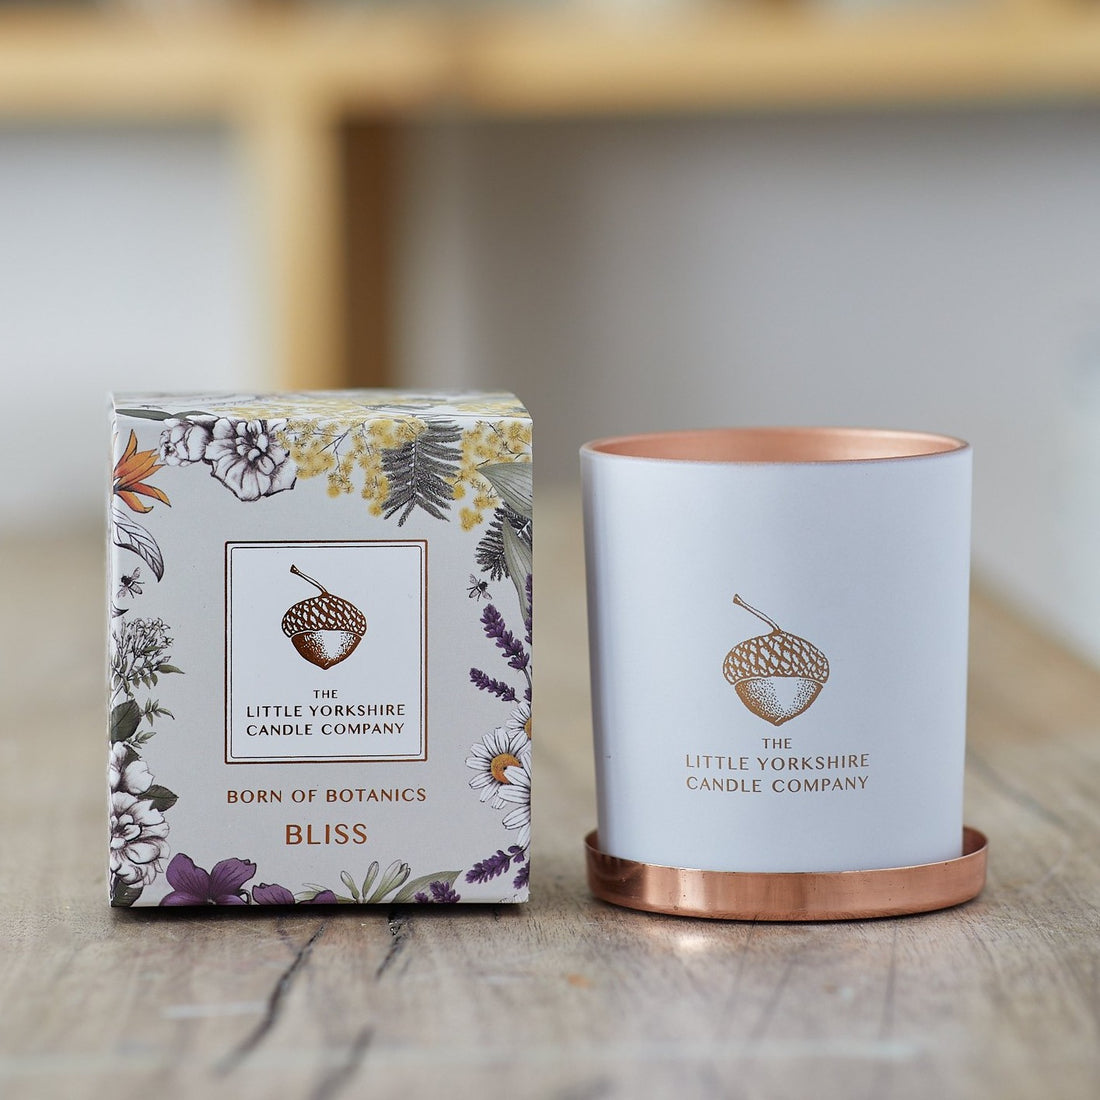  Matte white candle container sits on a wooden table next to it's packaging, which is printed with a delicate floral design.  The container features a copper acorn logo.